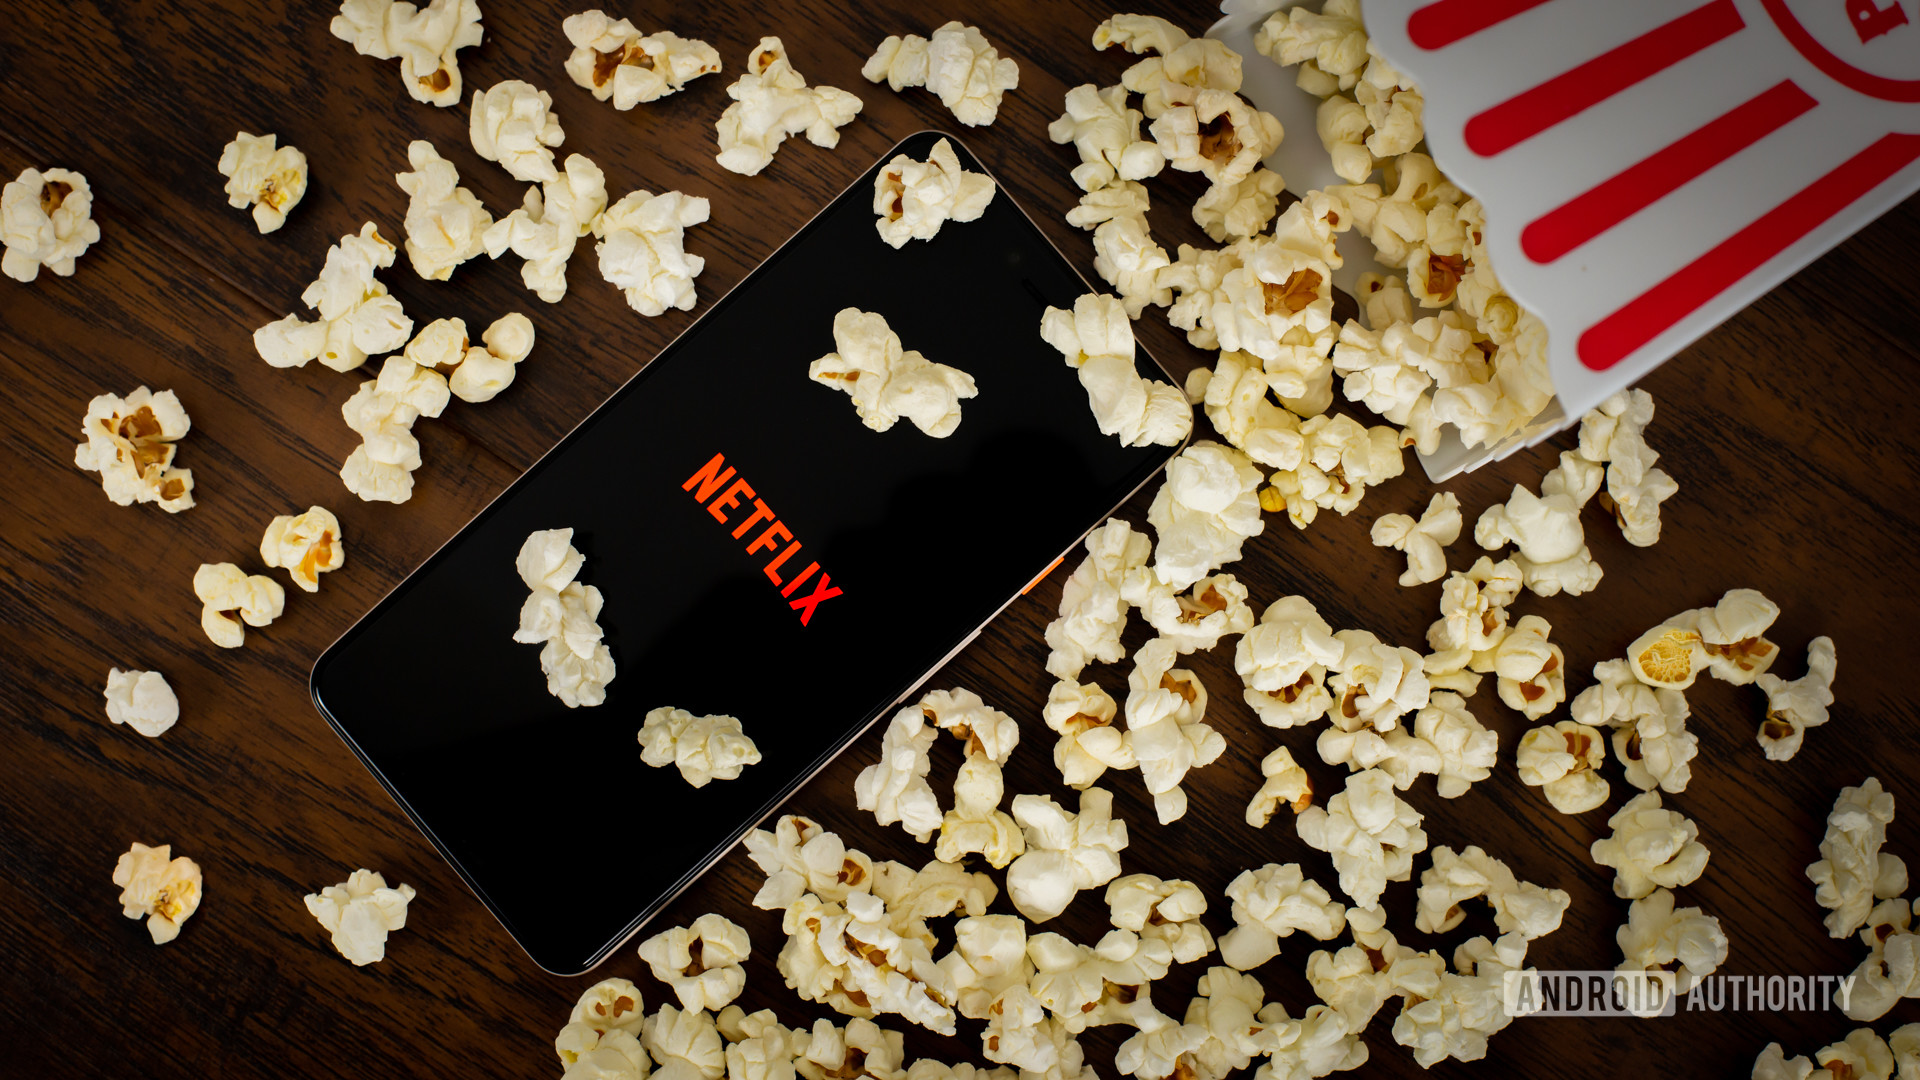 Netflix logo on a phone with popcorn on the table around it